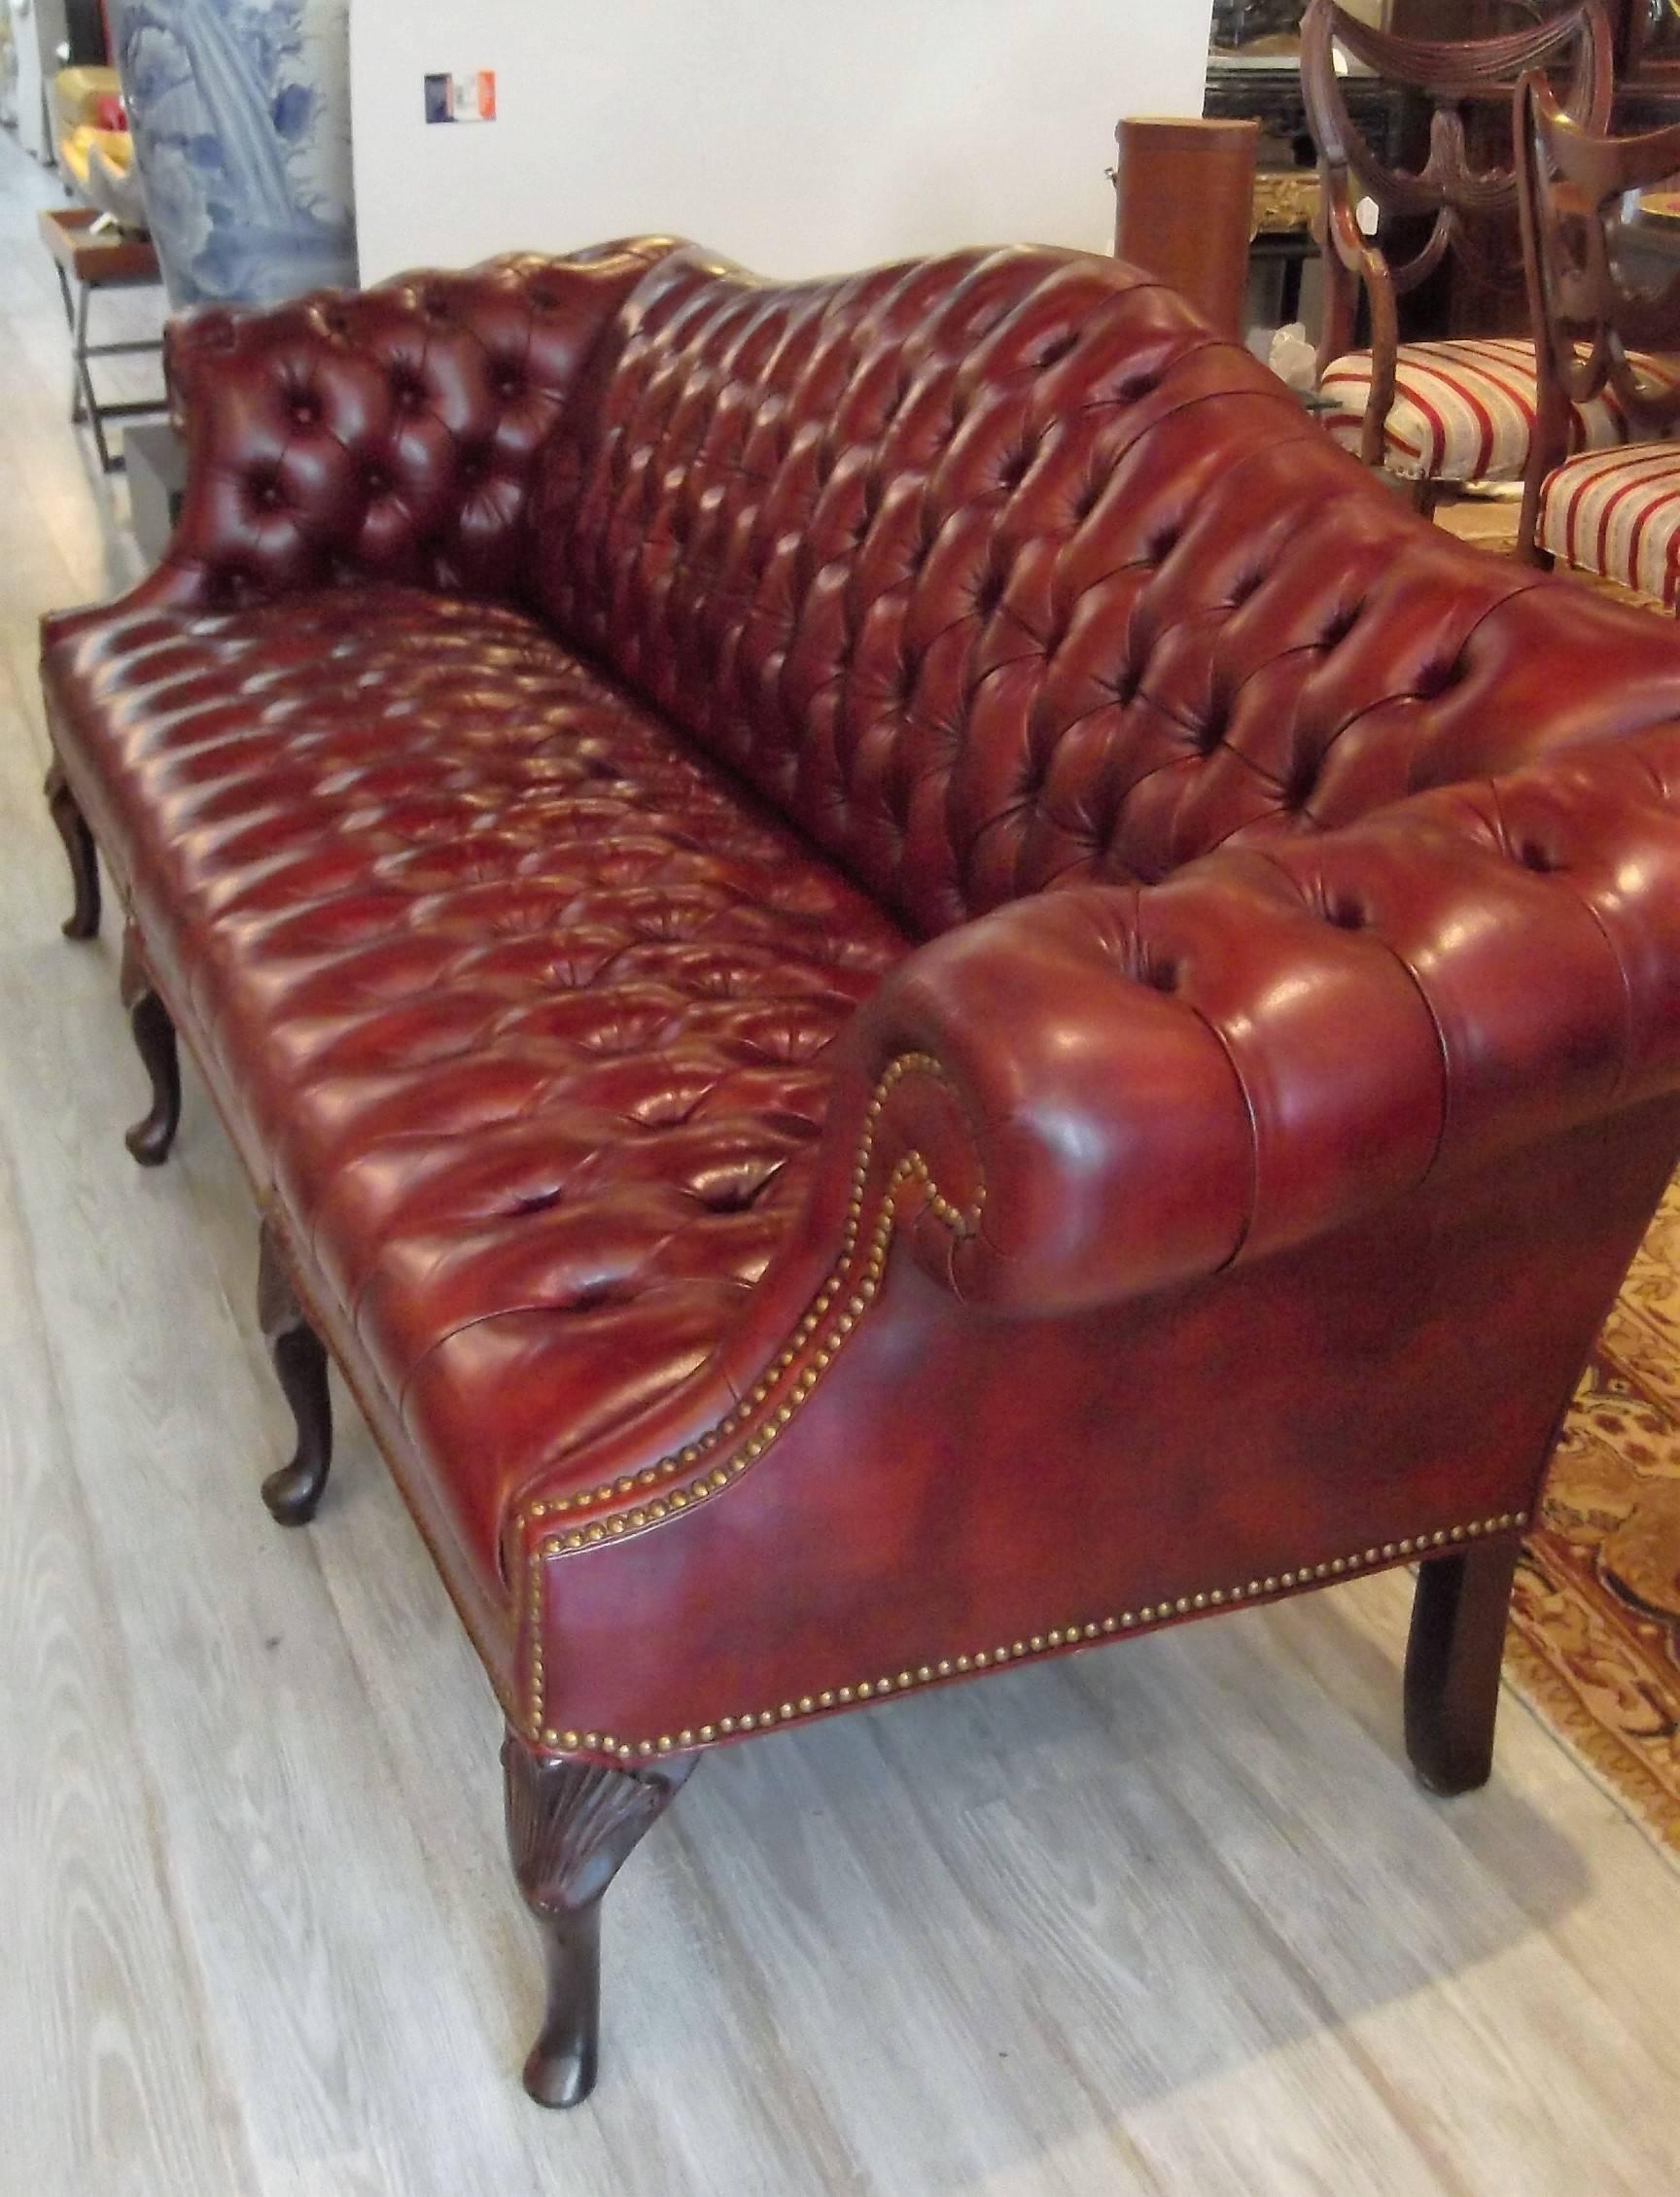 A camelback biscuit tufted cordovan leather sofa with carved mahogany Queen Anne legs. Brass nail head trim with rich colored leather. The legs have a fan motif carved at the knees. The springs are eight-way hand tied hourglass coils with a kiln